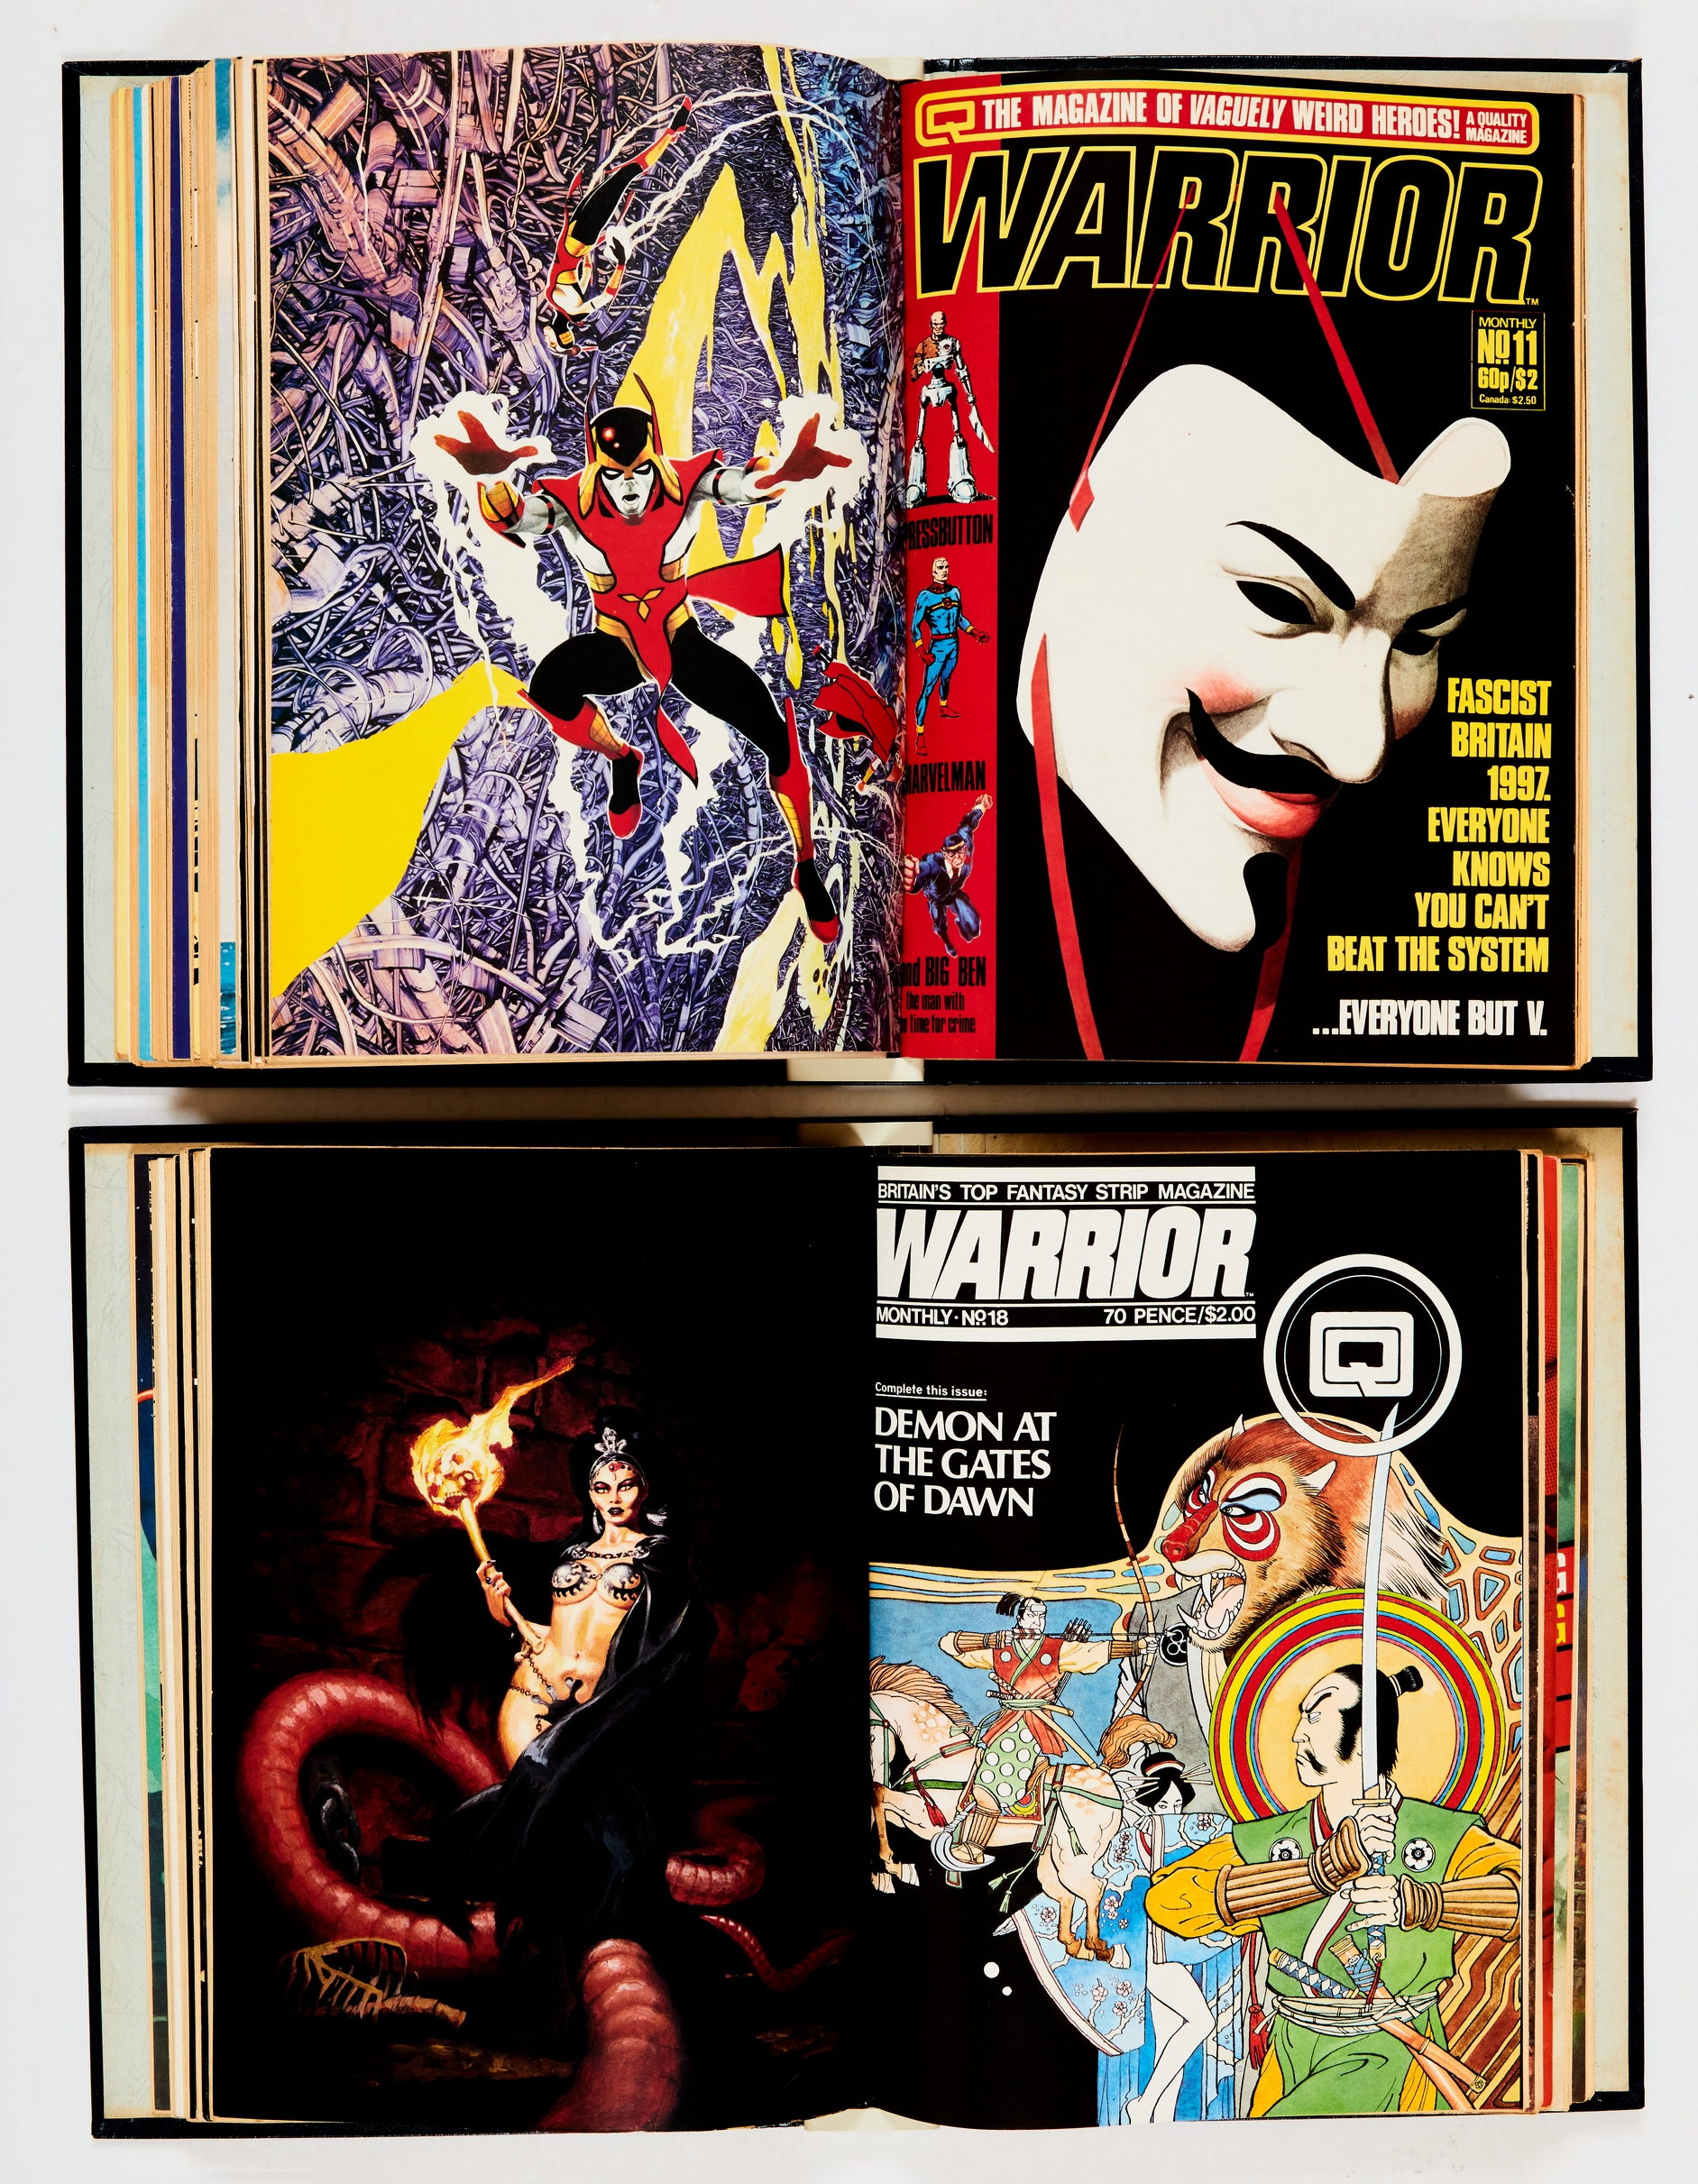 Warrior (1982-84) 1-22 in two Warrior official binders, comics retrievable and untrimmed. The